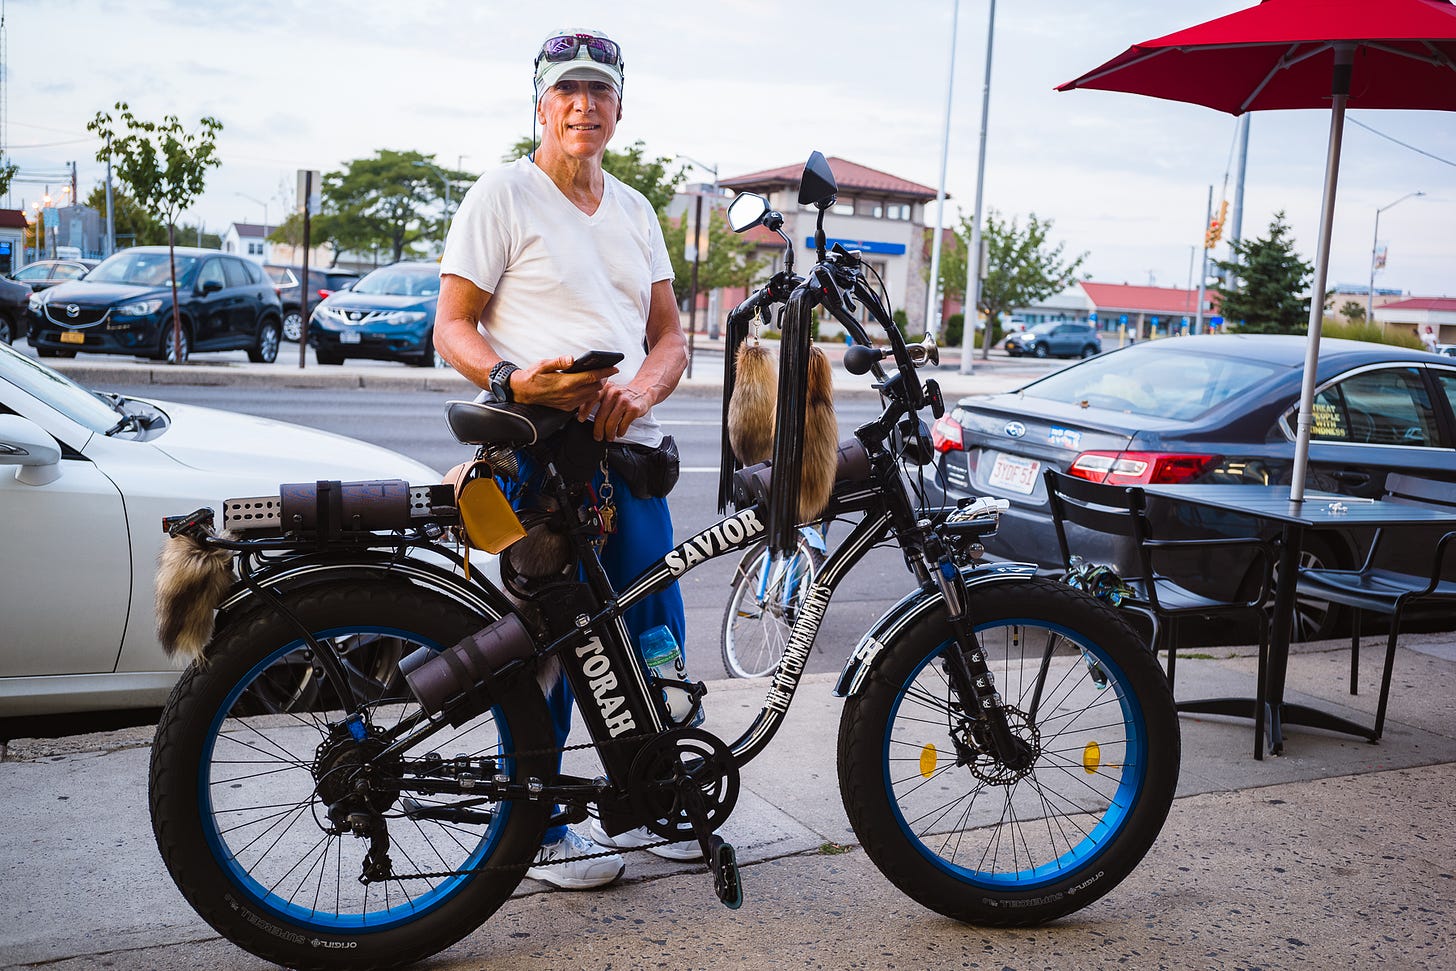 Man in a white cap with sunglasses pulled up on the peak, white v-neck t-shirt and blue pants behind his tricked-out black bicycle with furs and tassles hanging from the handlbars and 'TORAH' 'SAVIOR' and 'THE 10 COMMANDMENTS' written in white on the frame